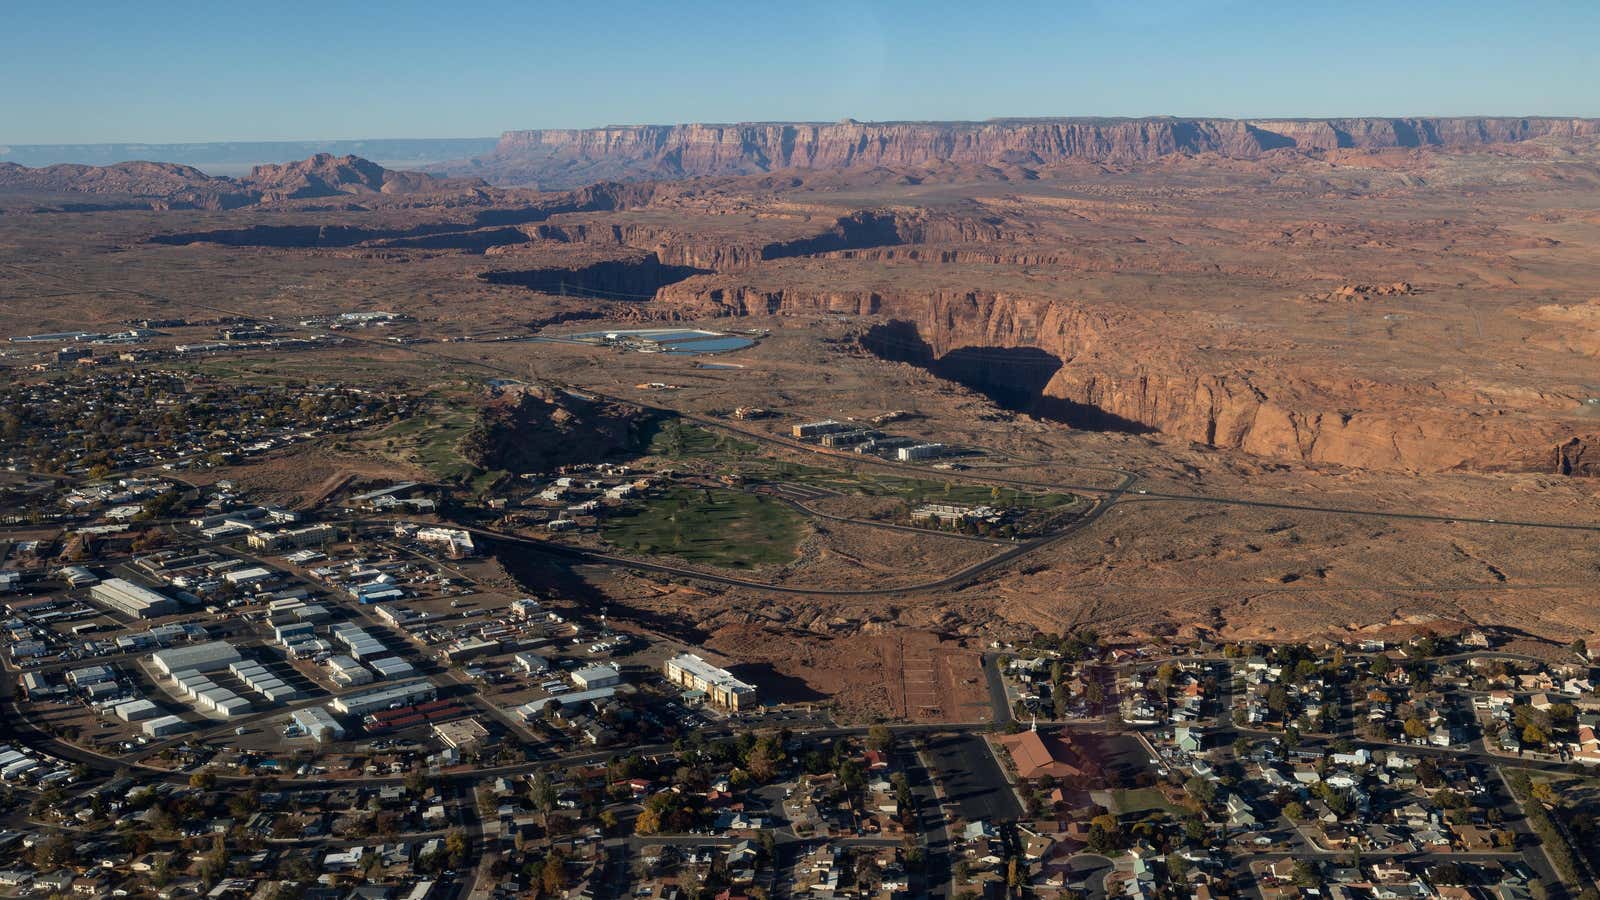 Arizona doesn't have enough water for all of its new housing demand